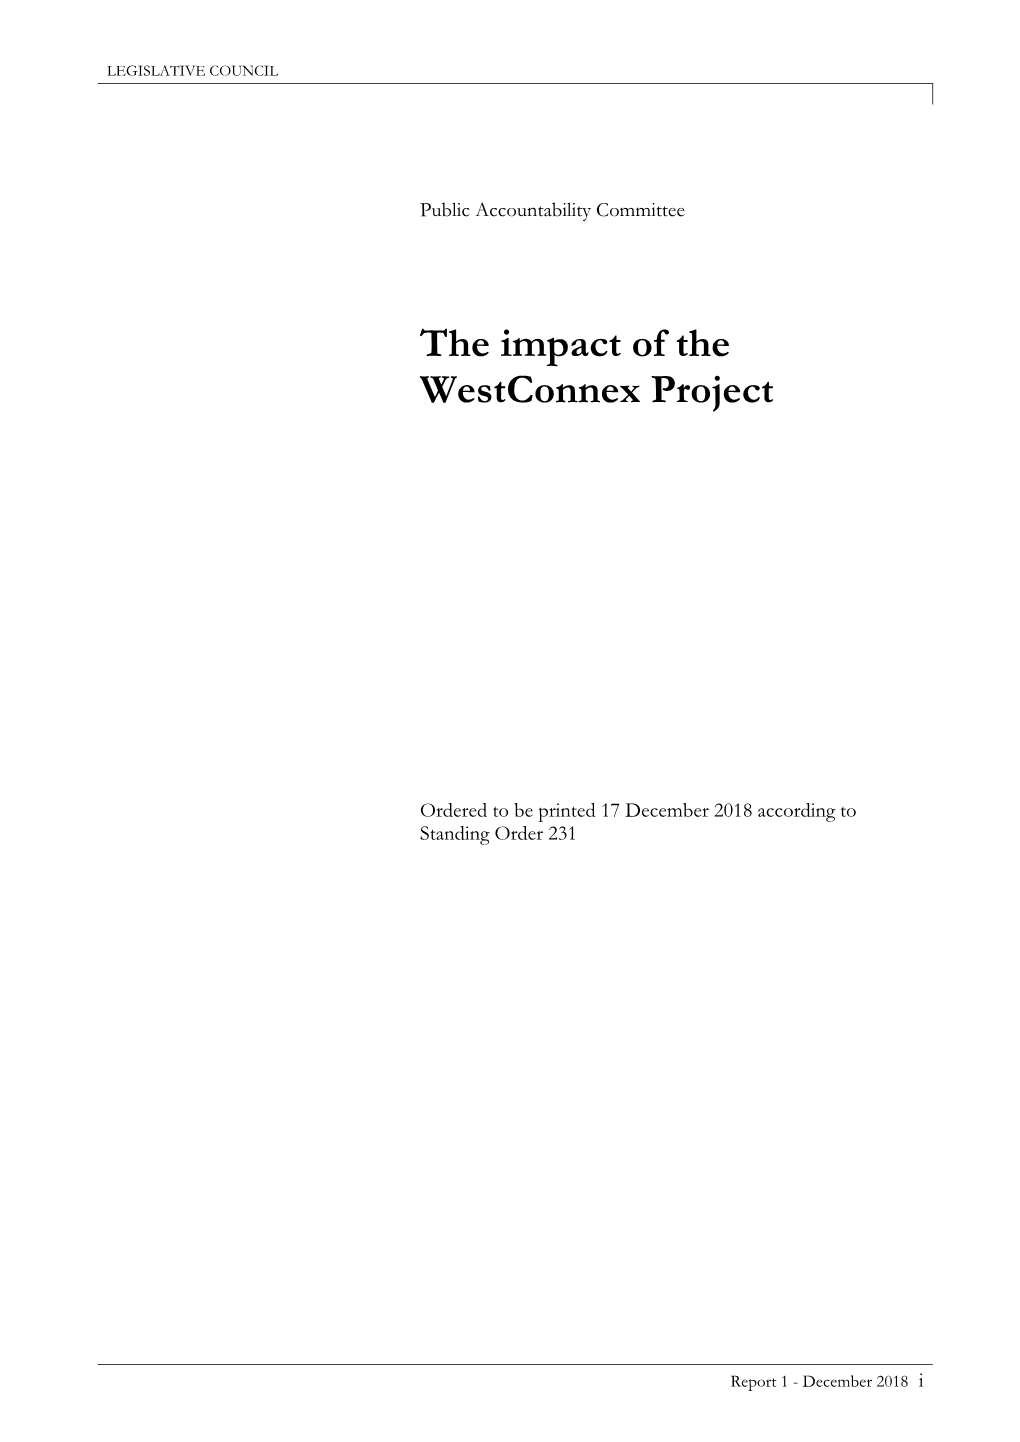 The Impact of the Westconnex Project